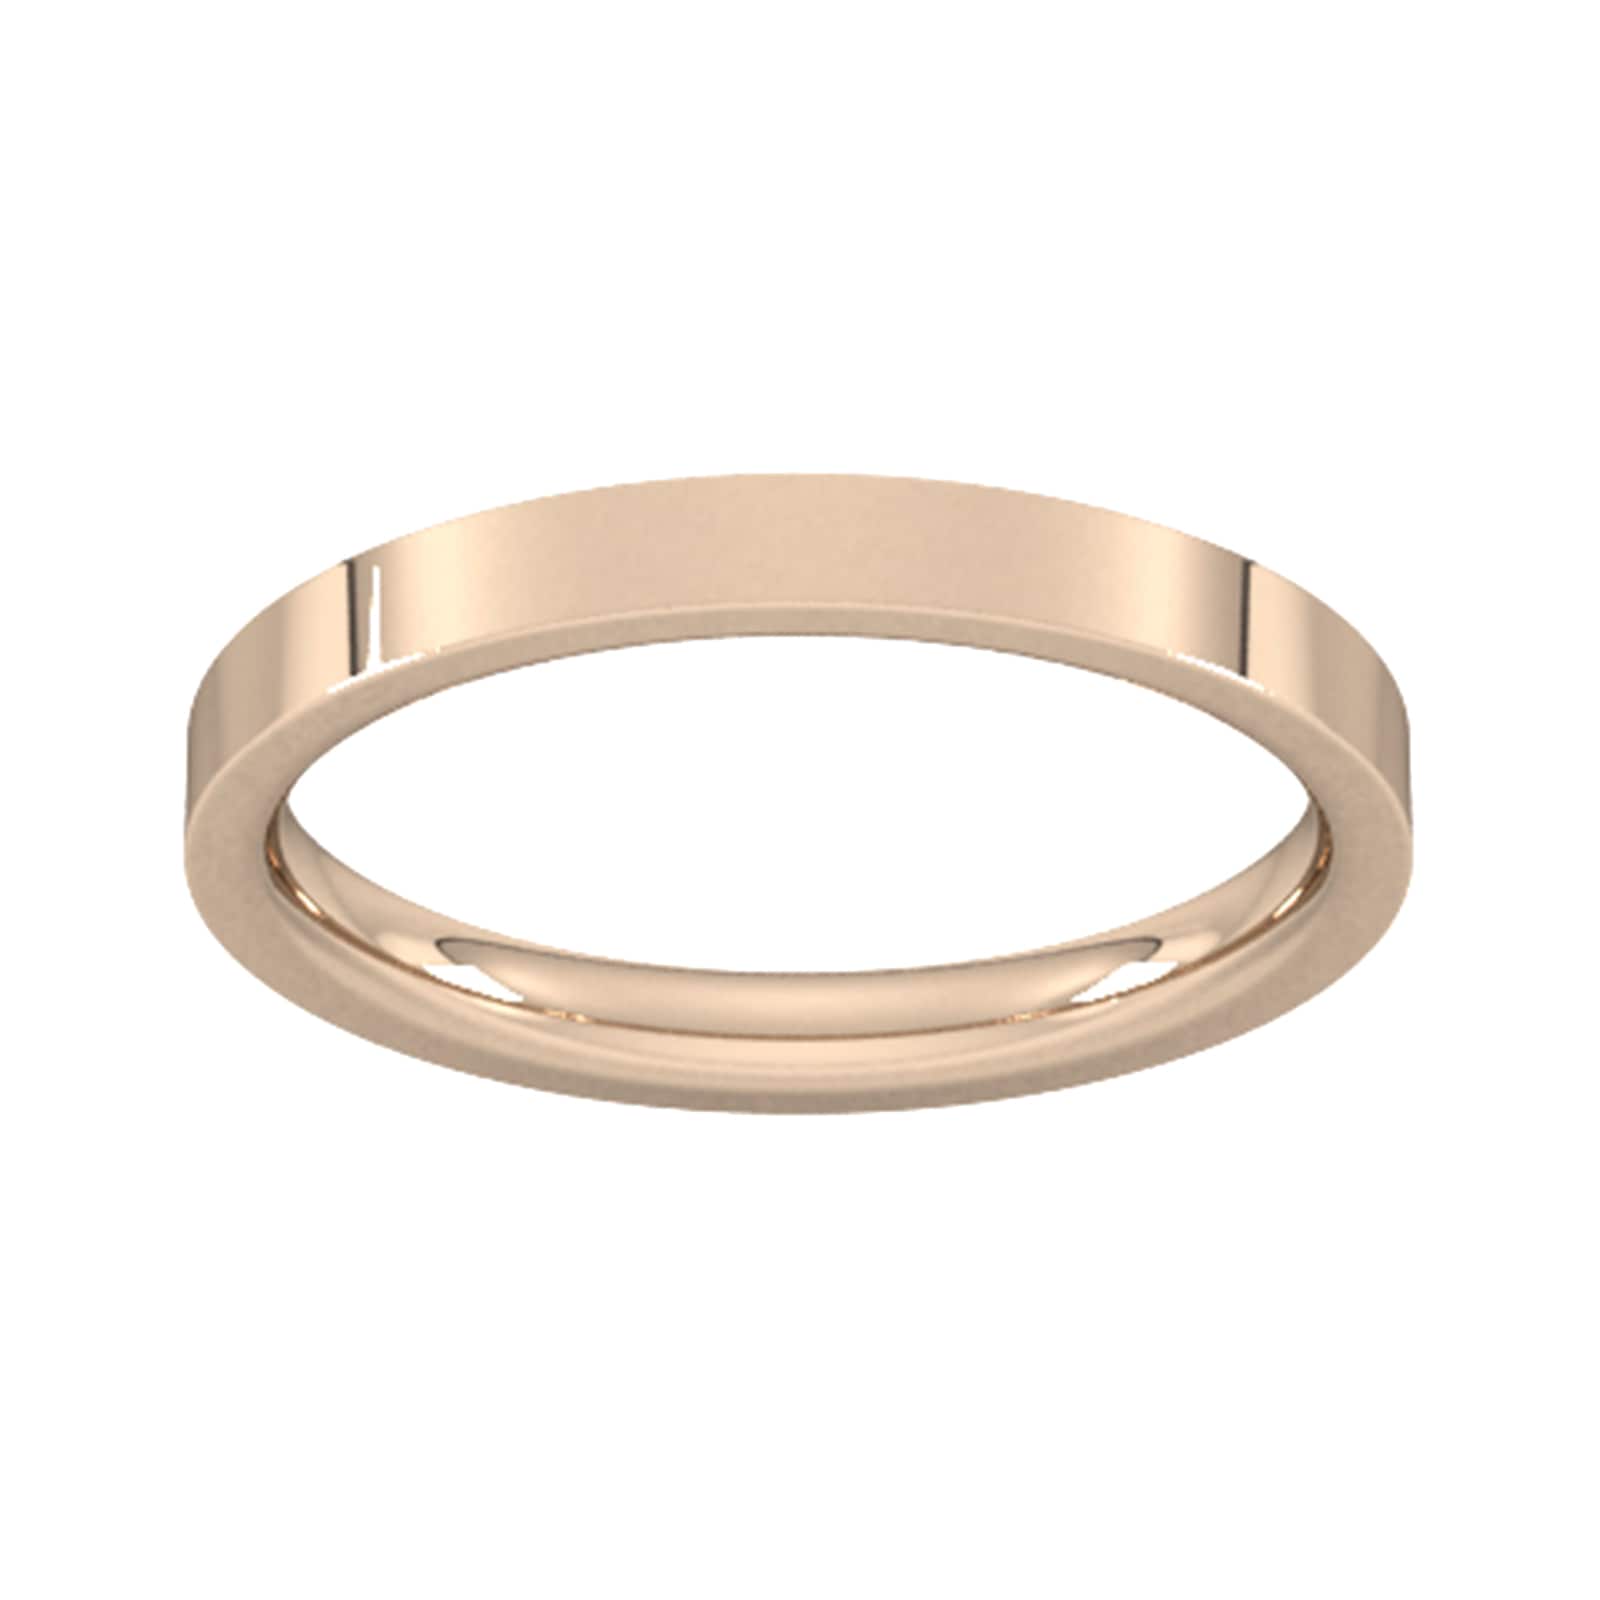 2.5mm Flat Court Heavy Wedding Ring In 18 Carat Rose Gold - Ring Size O